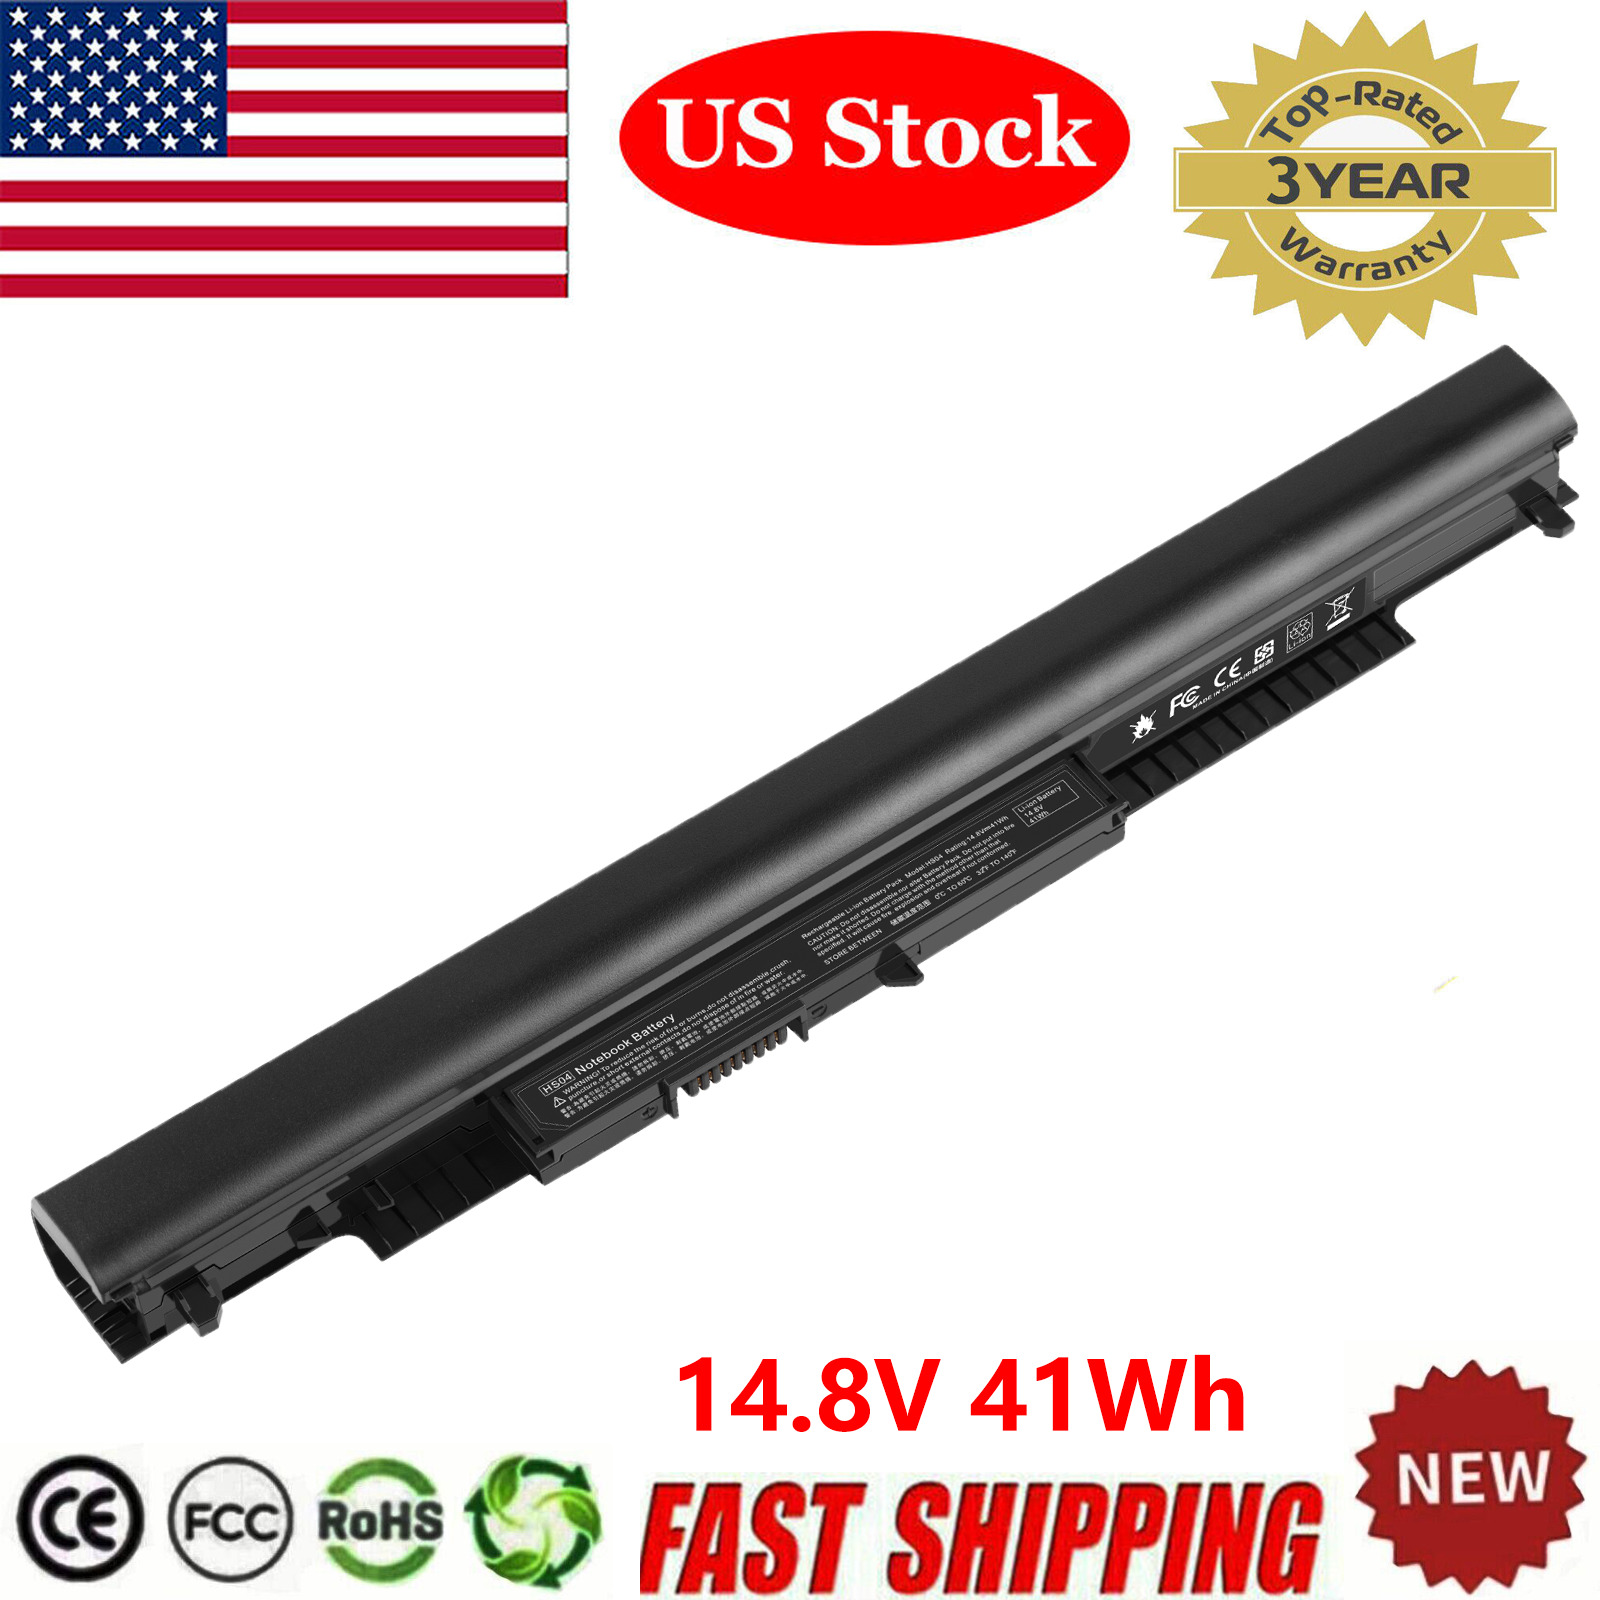 Spare HS03 HS04 HS04041 Laptop Battery for HP 807957-001 807956-001 807612-421